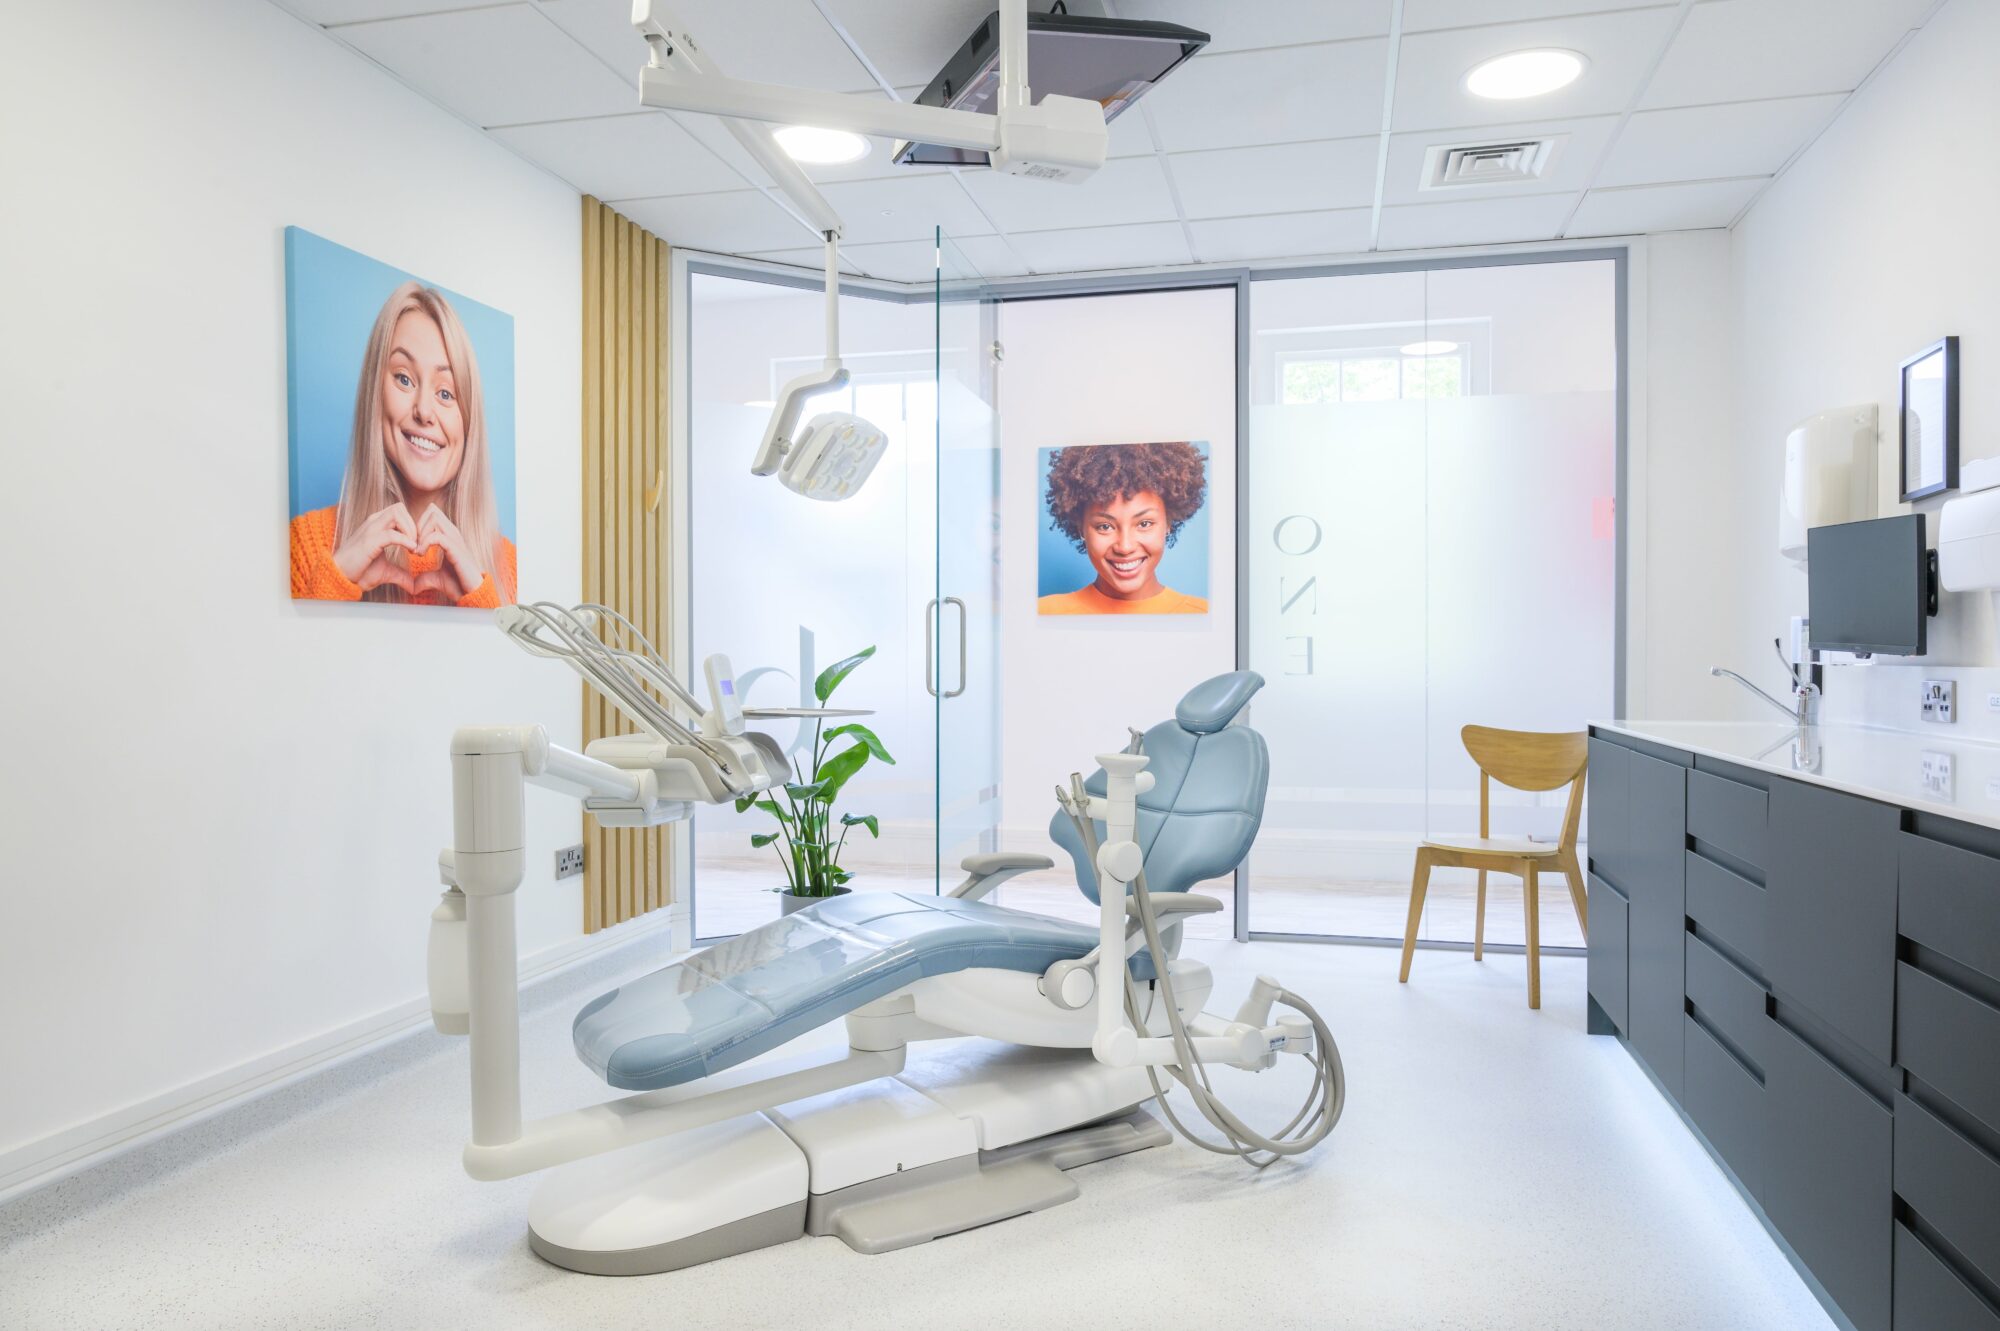 Beyond Dental – 50% off new patient registration, 10% off all treatment